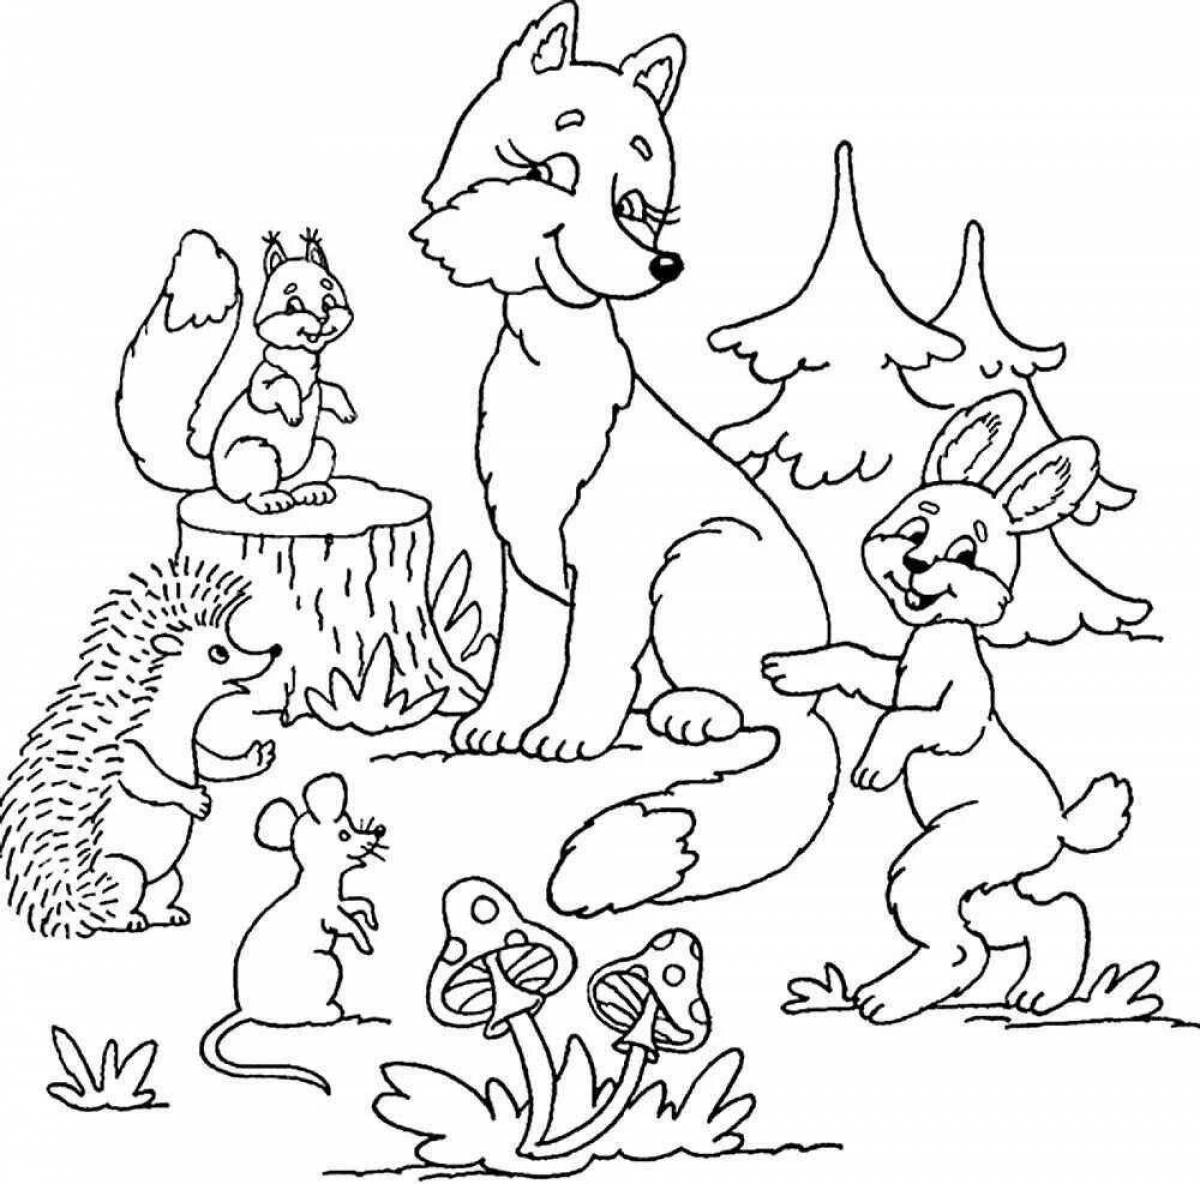 Fun coloring of forest animals for children 4-5 years old